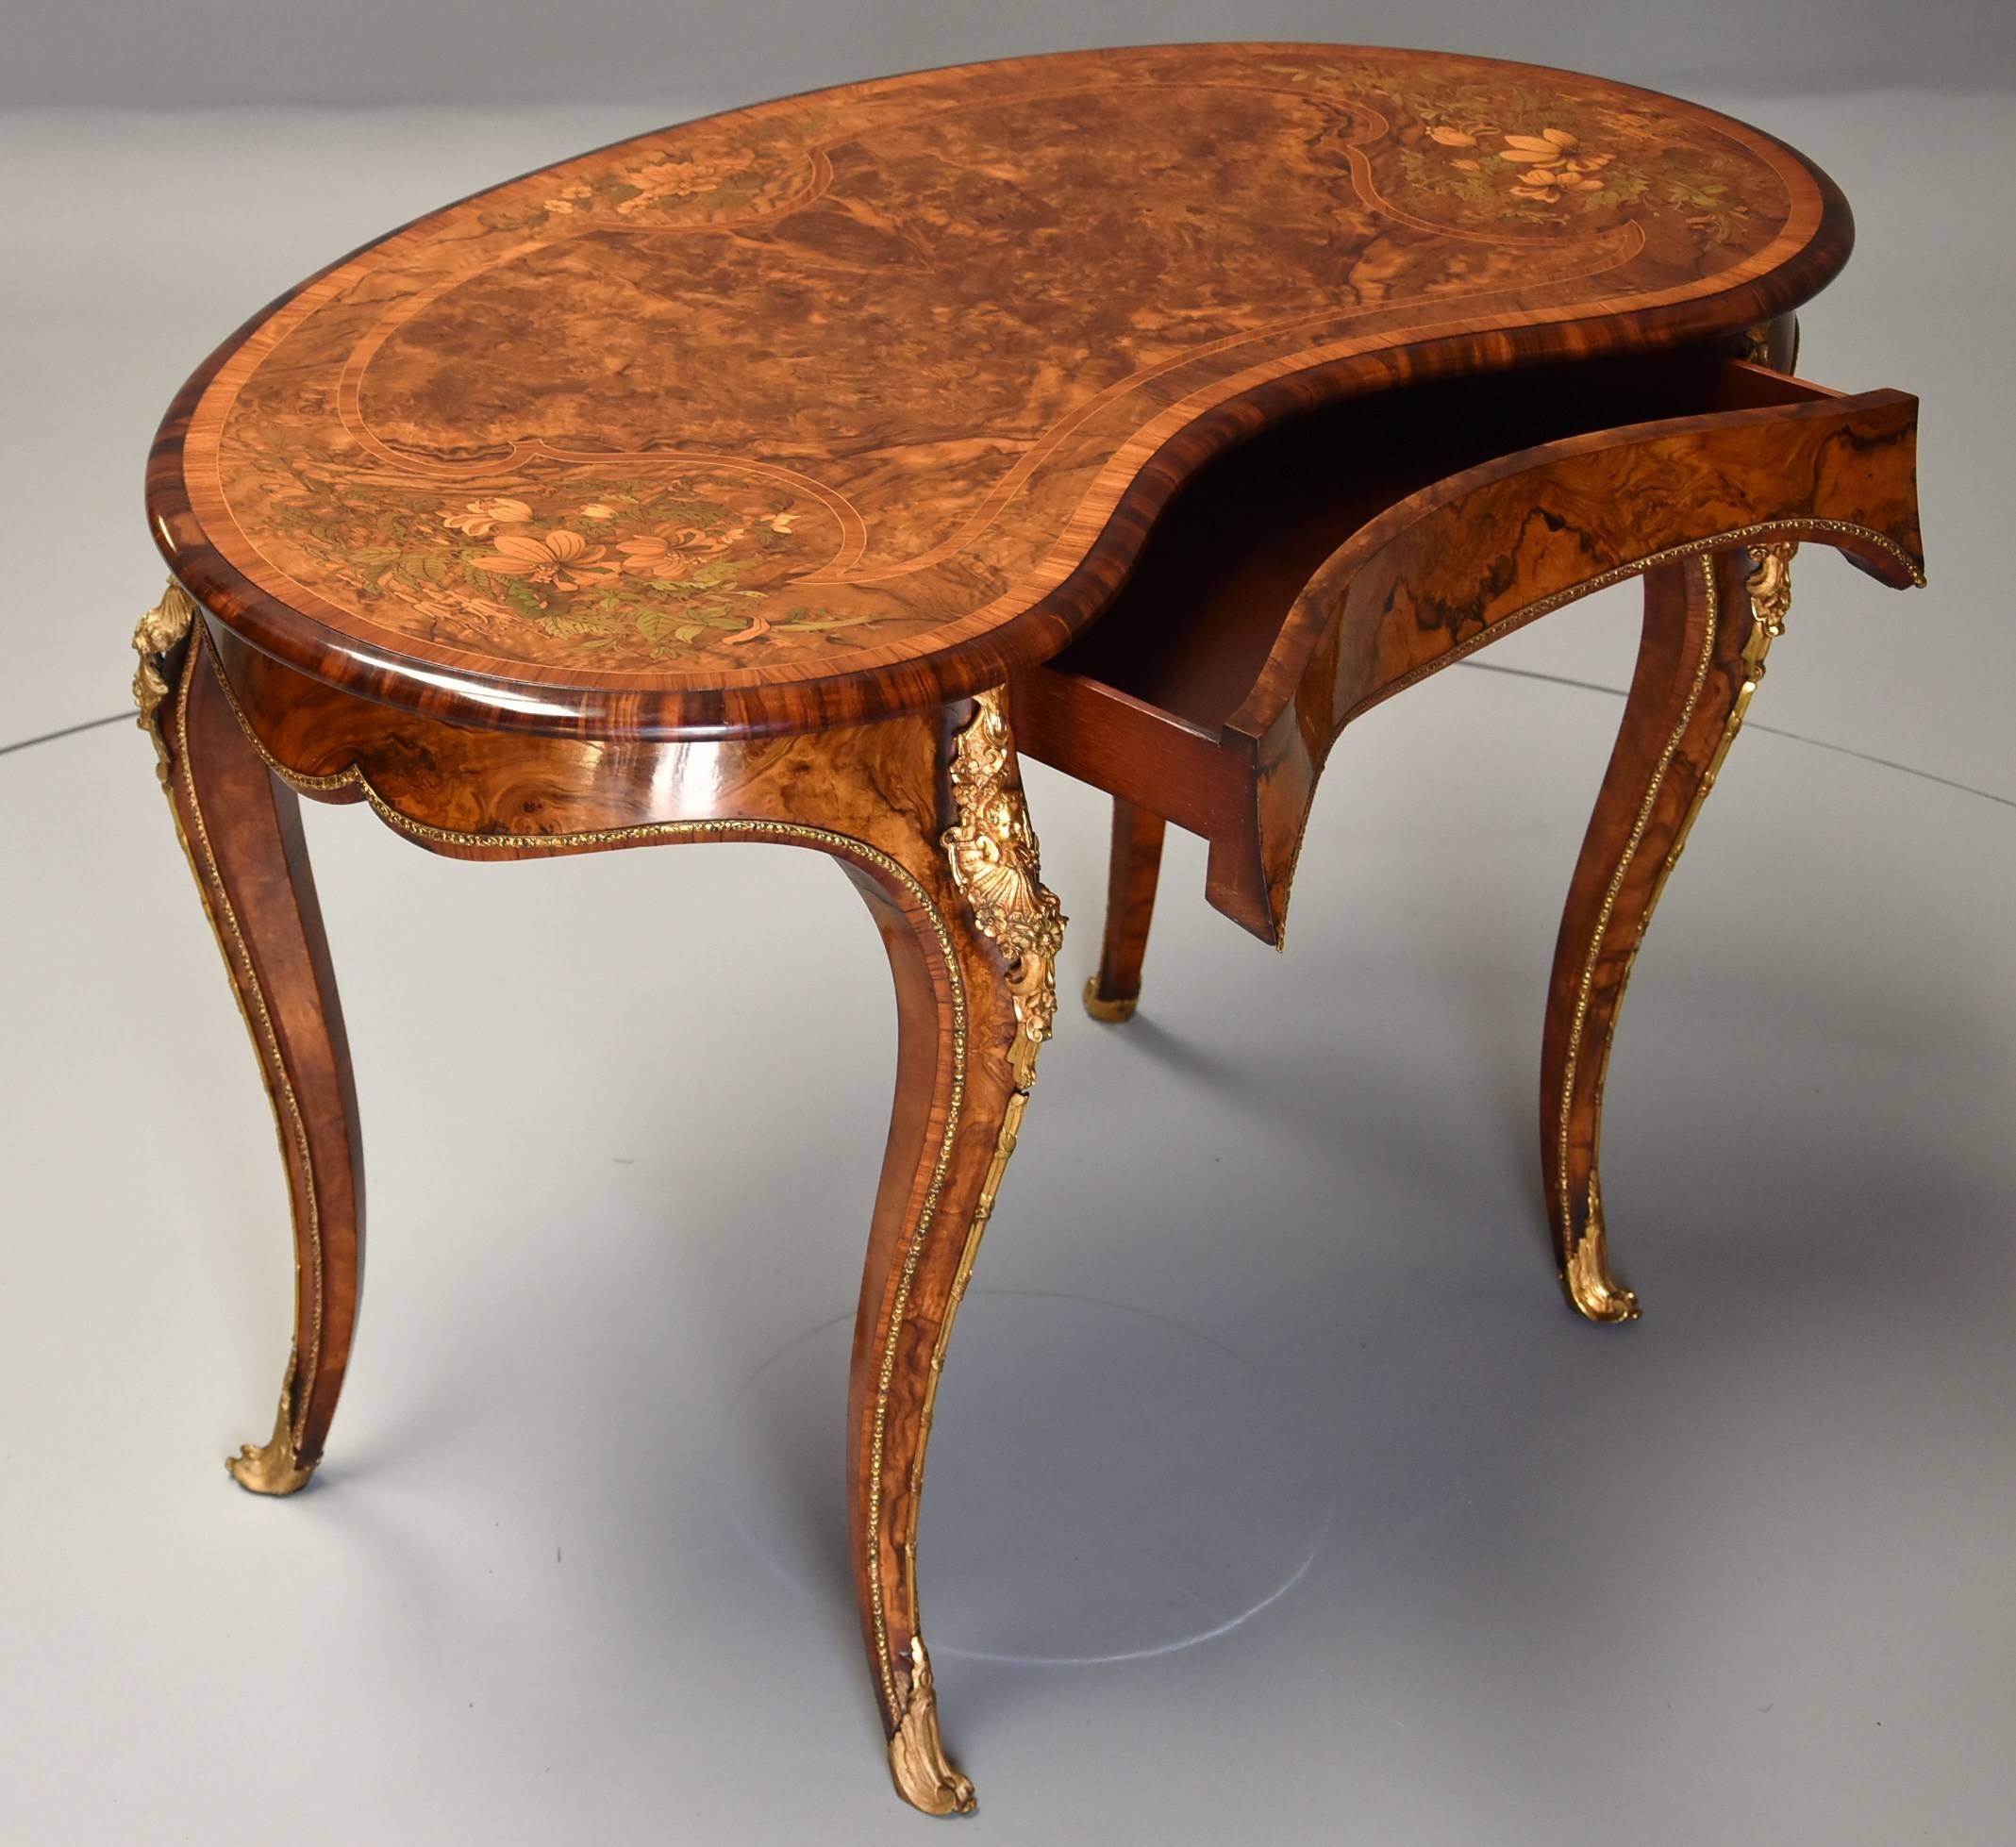 Kingwood Superb Quality Mid-19th Century Burr Walnut and Marquetry Kidney Shape Table For Sale